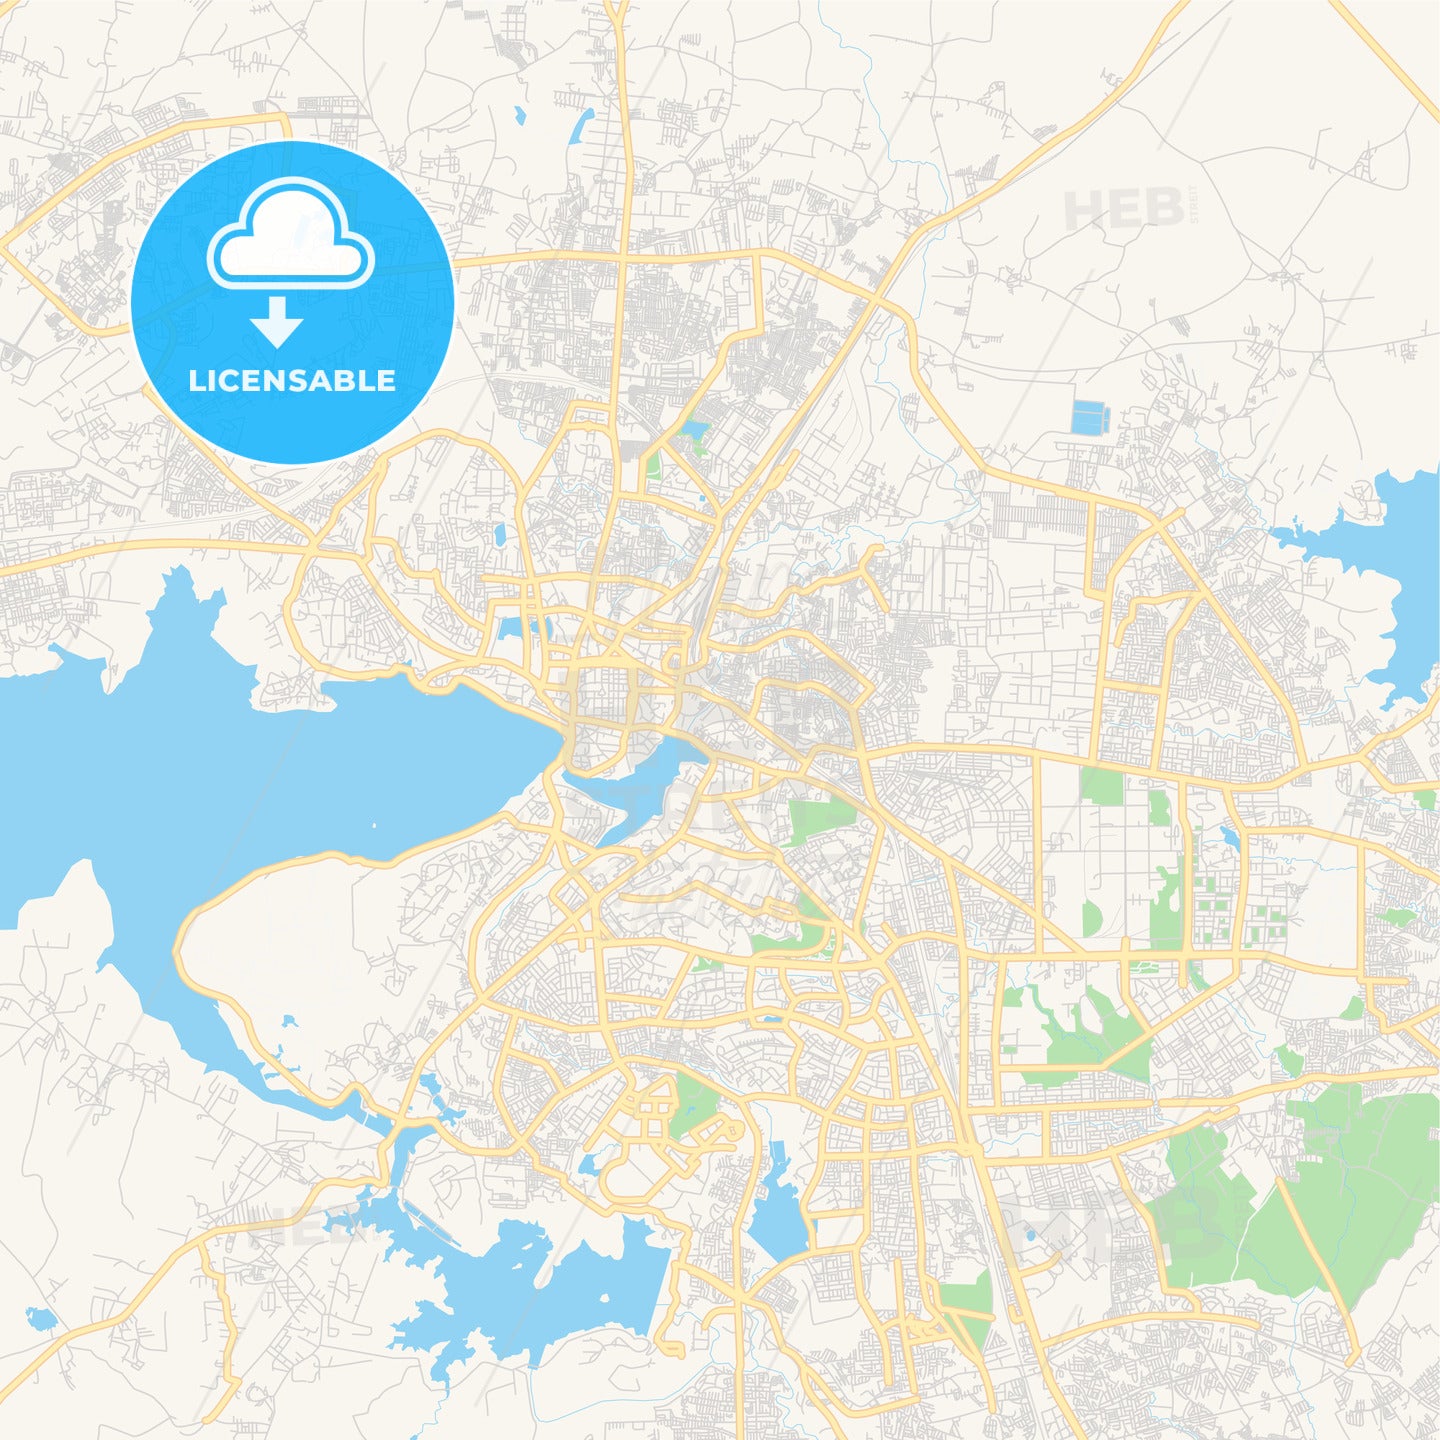 Printable street map of Bhopal, India